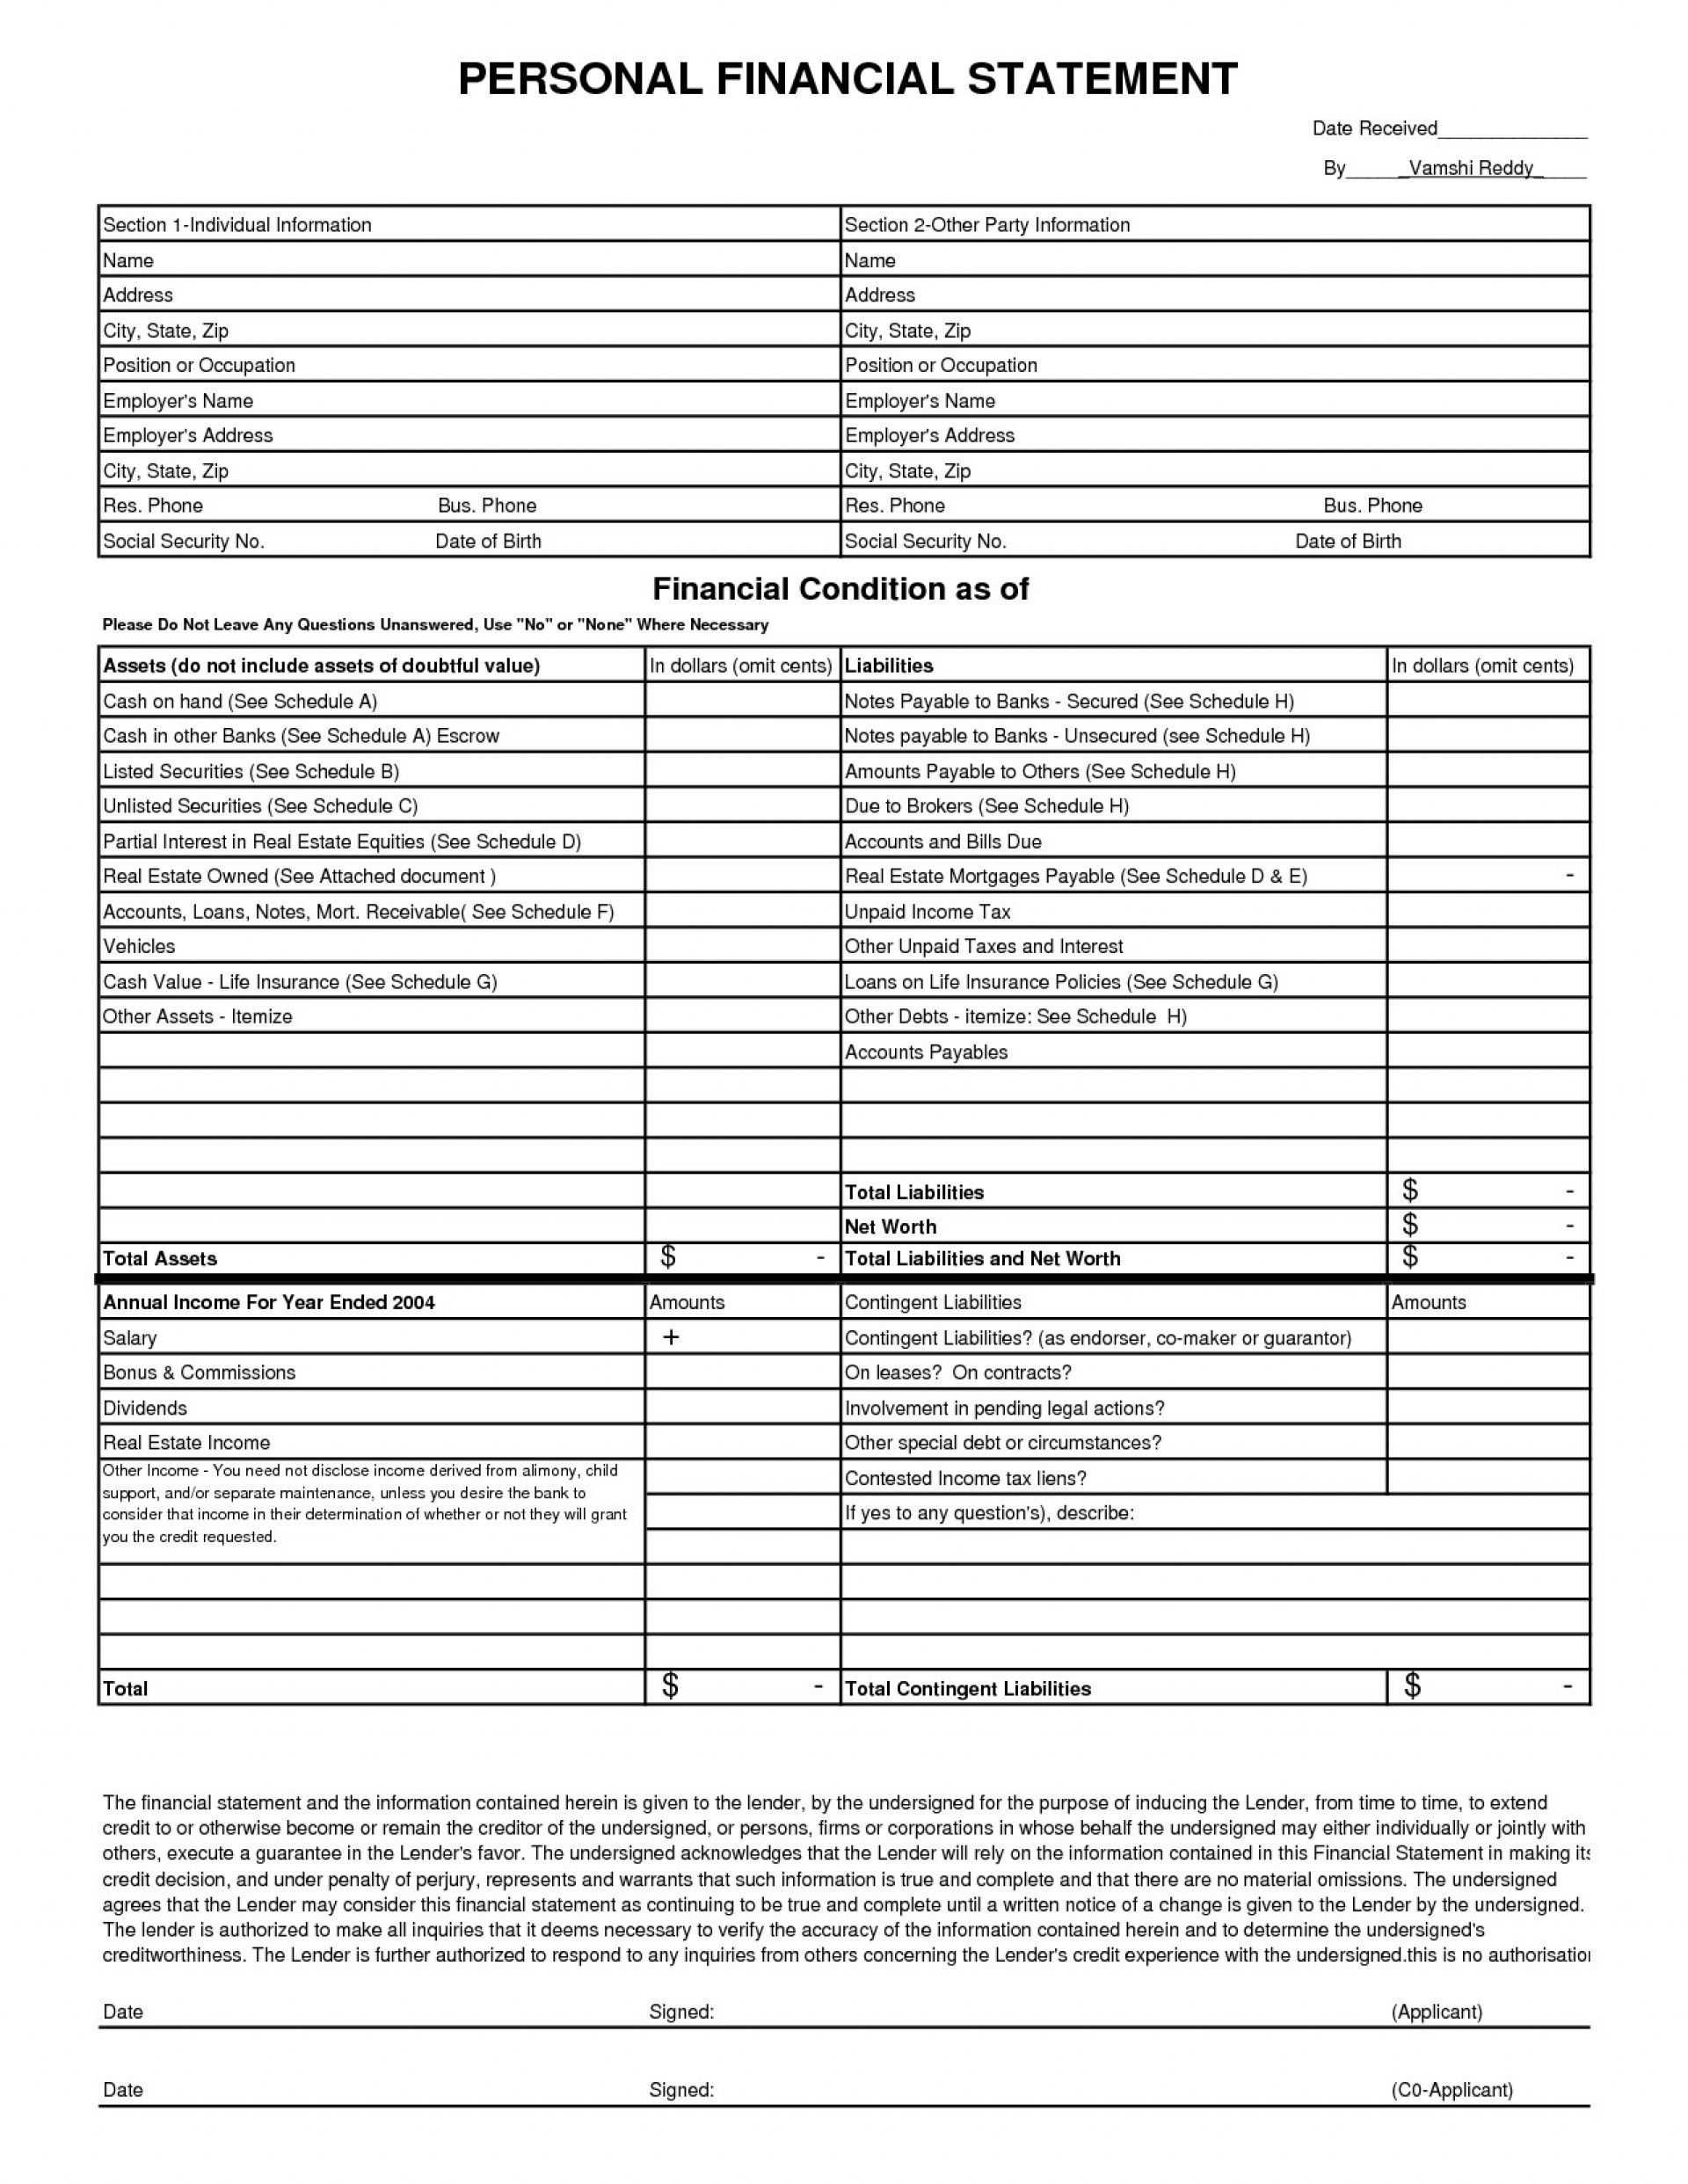 Personal Financial Statement Template Microsoft Word Format Within Blank Personal Financial Statement Template